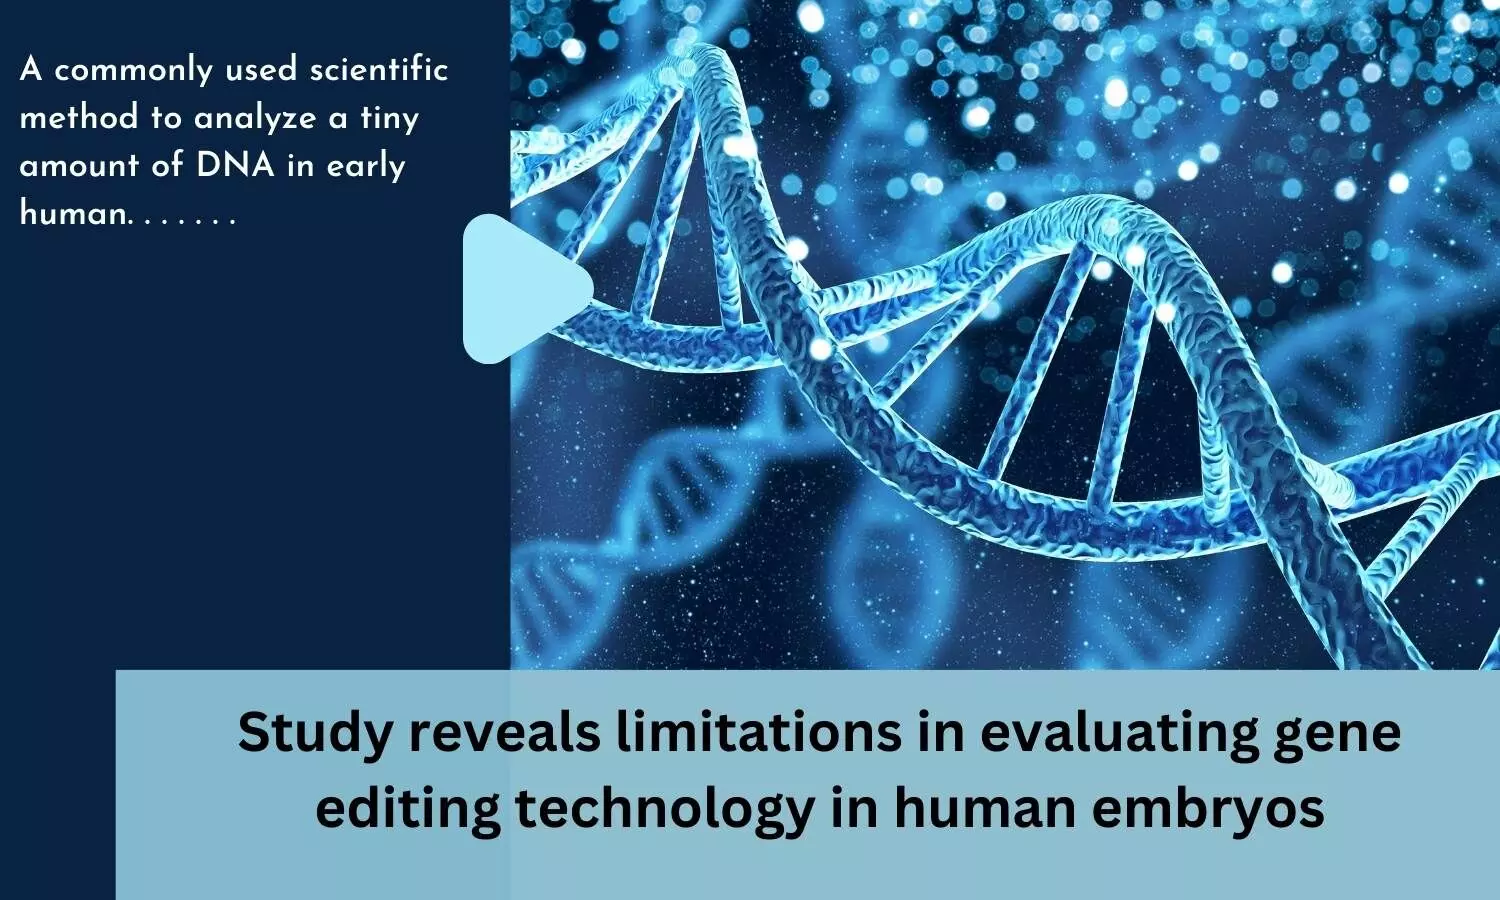 Study reveals limitations in evaluating gene editing technology in human embryos